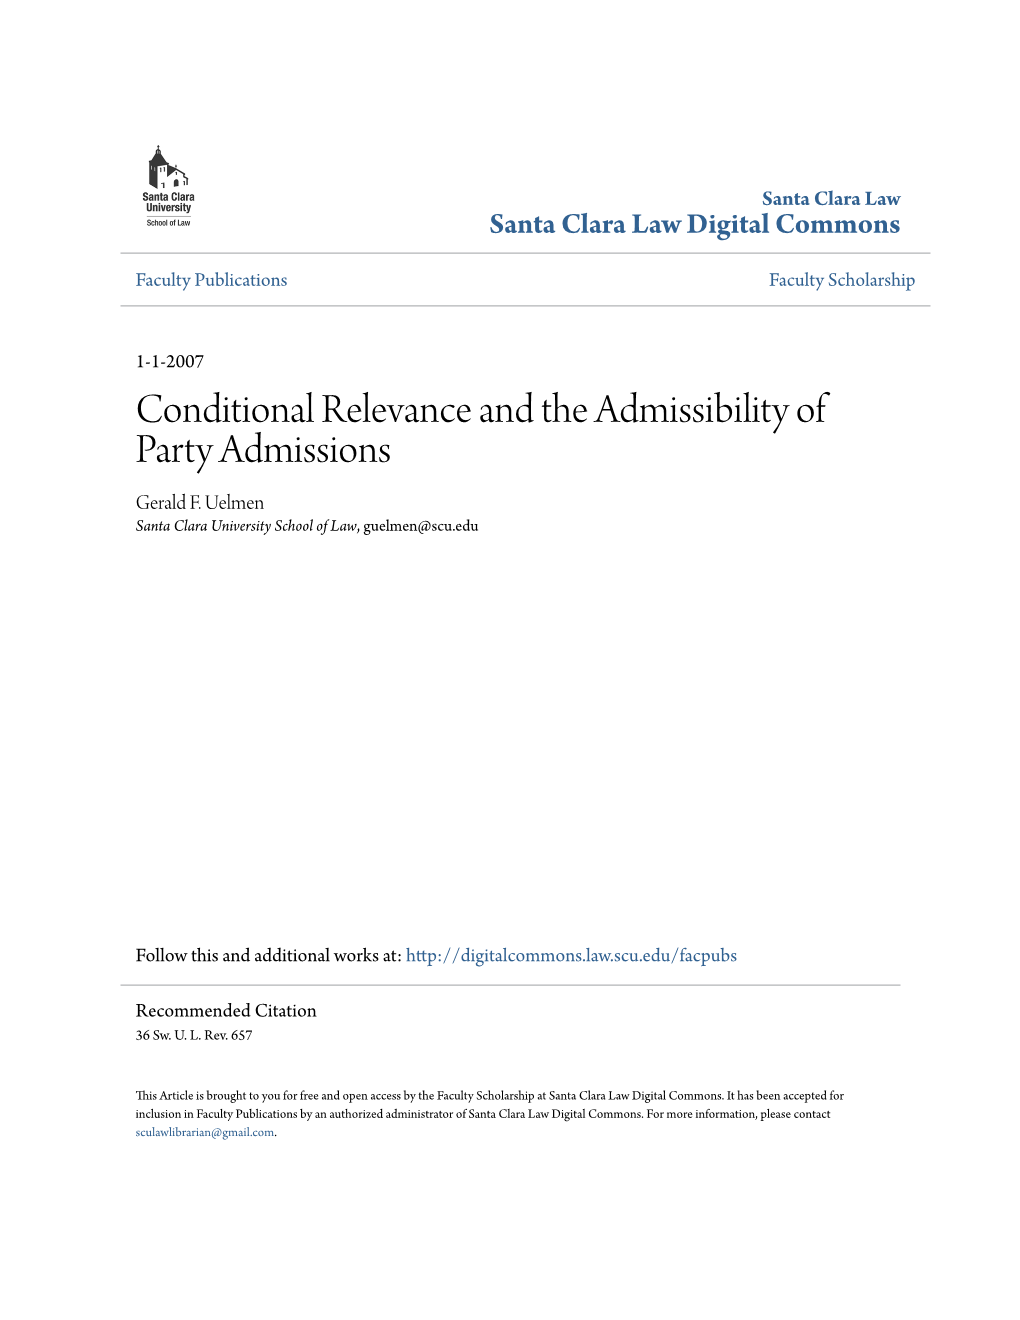 Conditional Relevance and the Admissibility of Party Admissions Gerald F